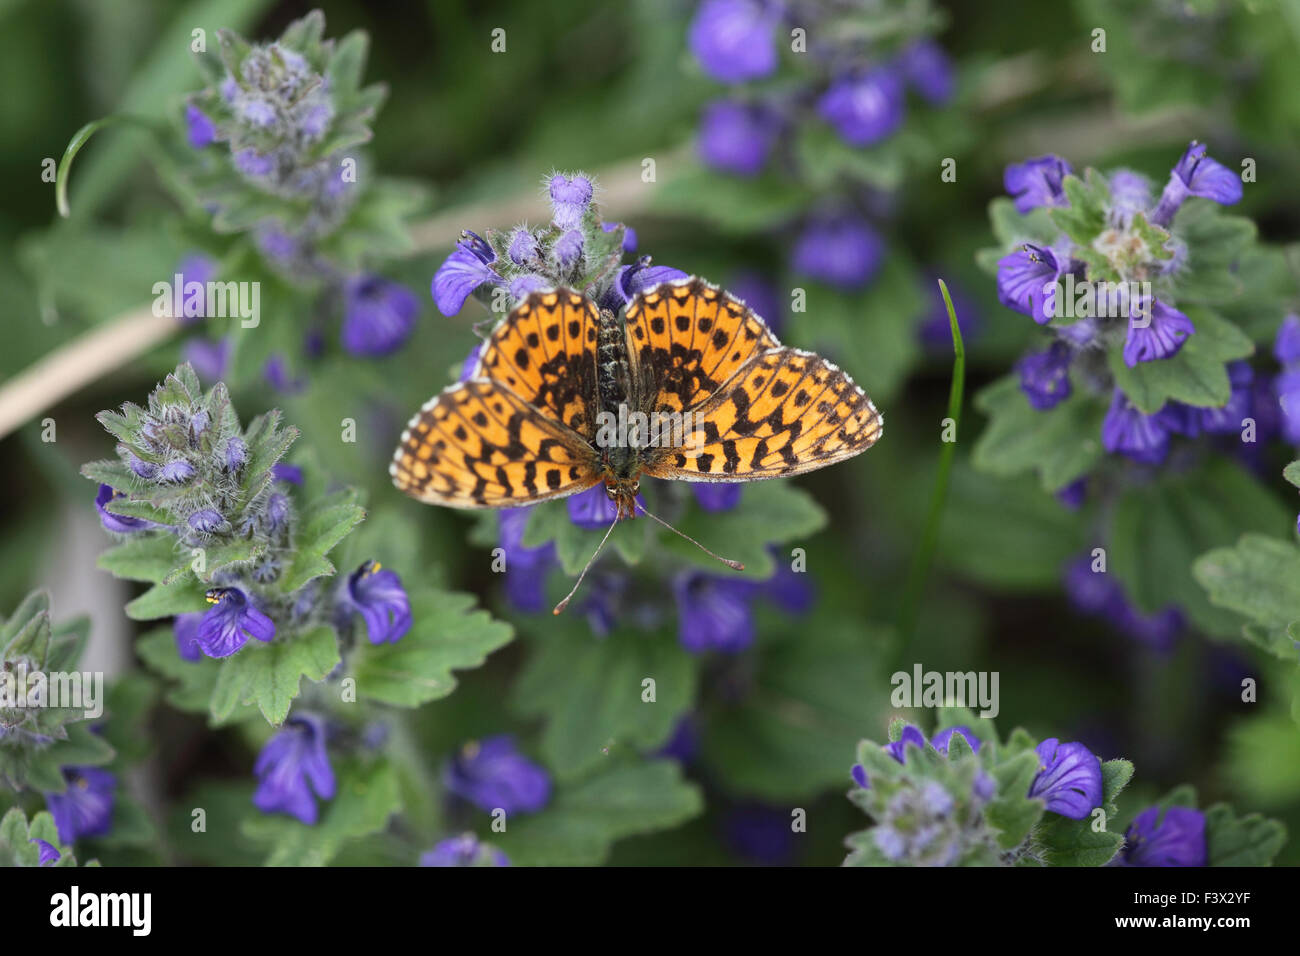 taking nectar from flower Hungary May 2015 Stock Photo